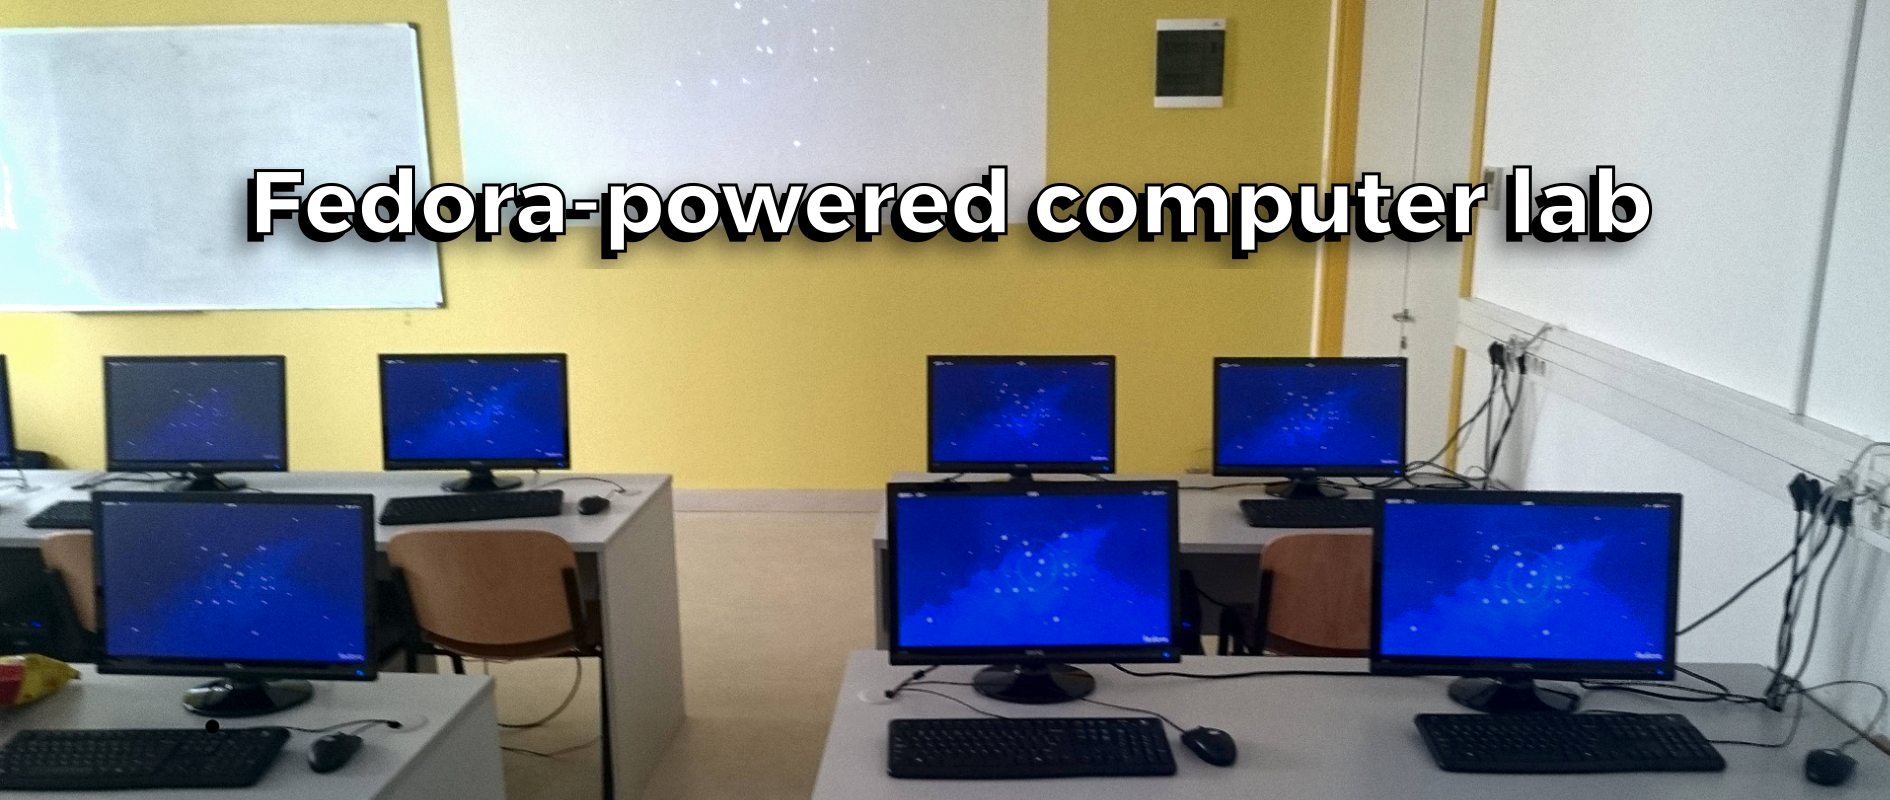 Fedora-powered computer lab at our university